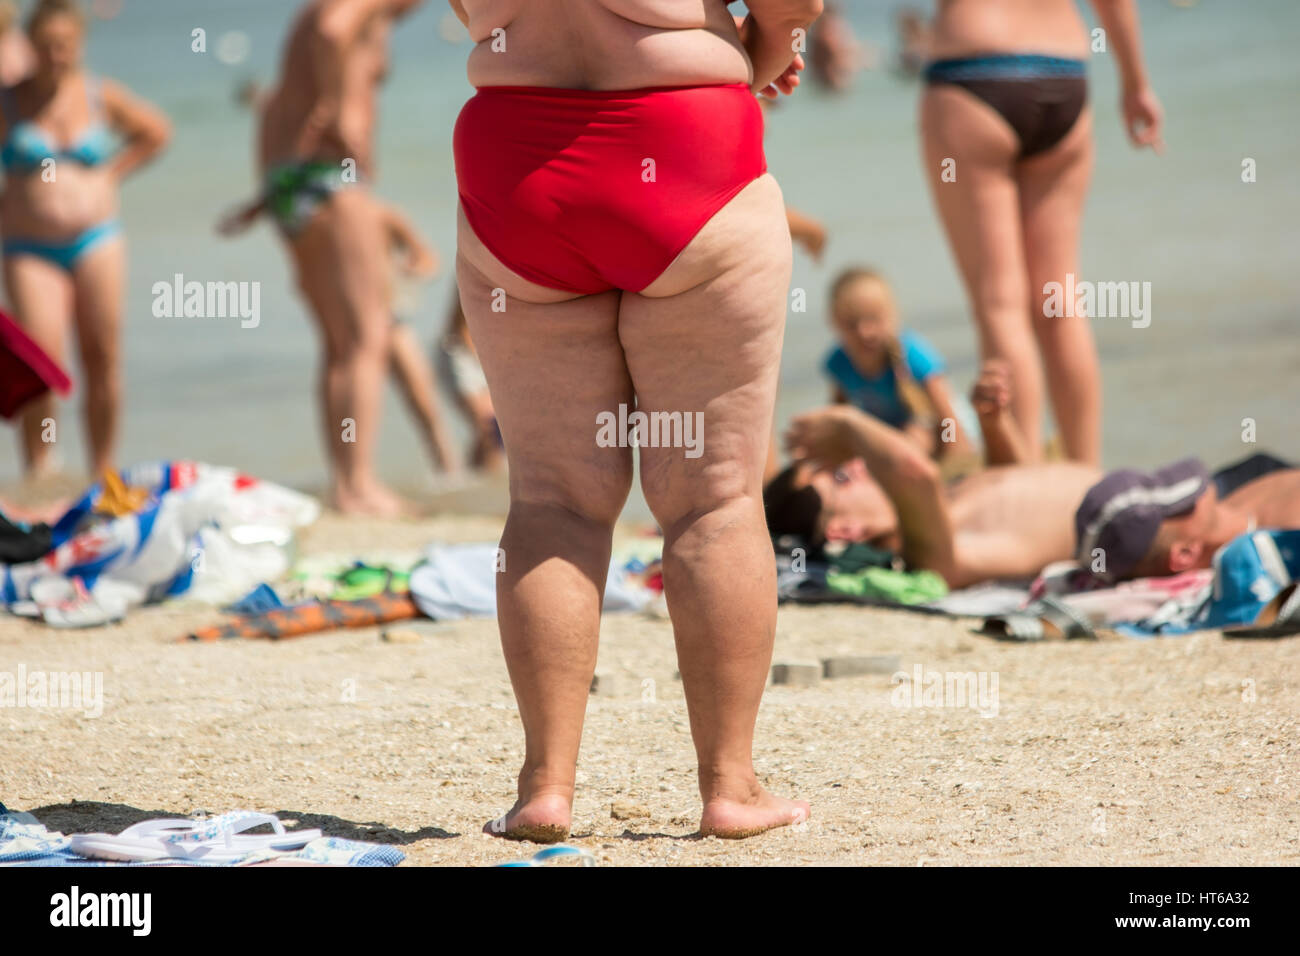 Legs of an obese woman. Overweight lady on the beach. Effect of ...